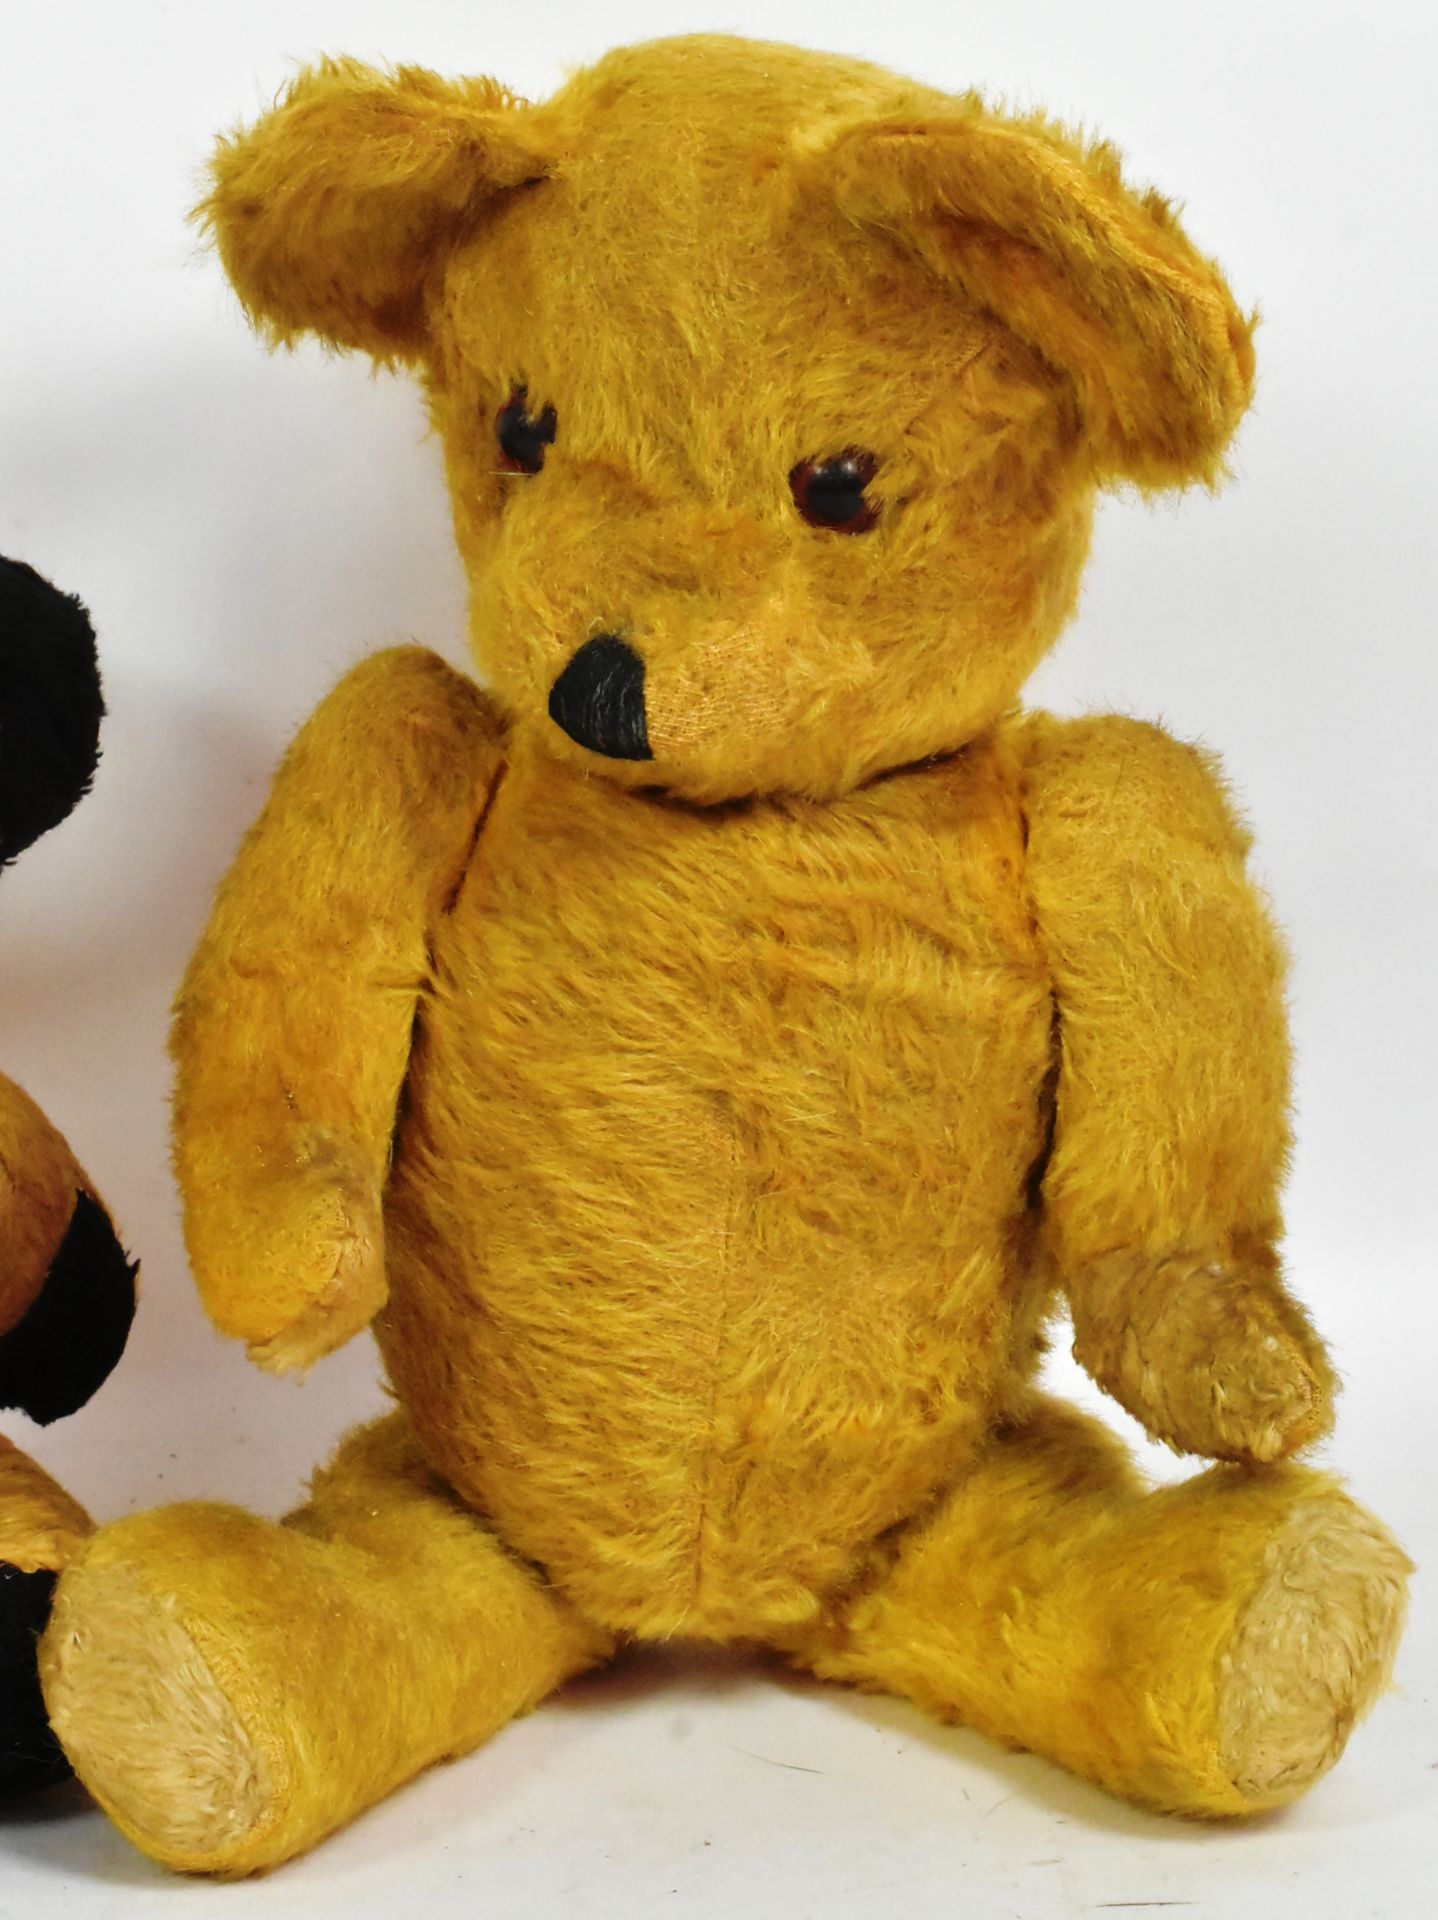 TWO VINTAGE SOFT TOY TEDDY BEARS - Image 3 of 4